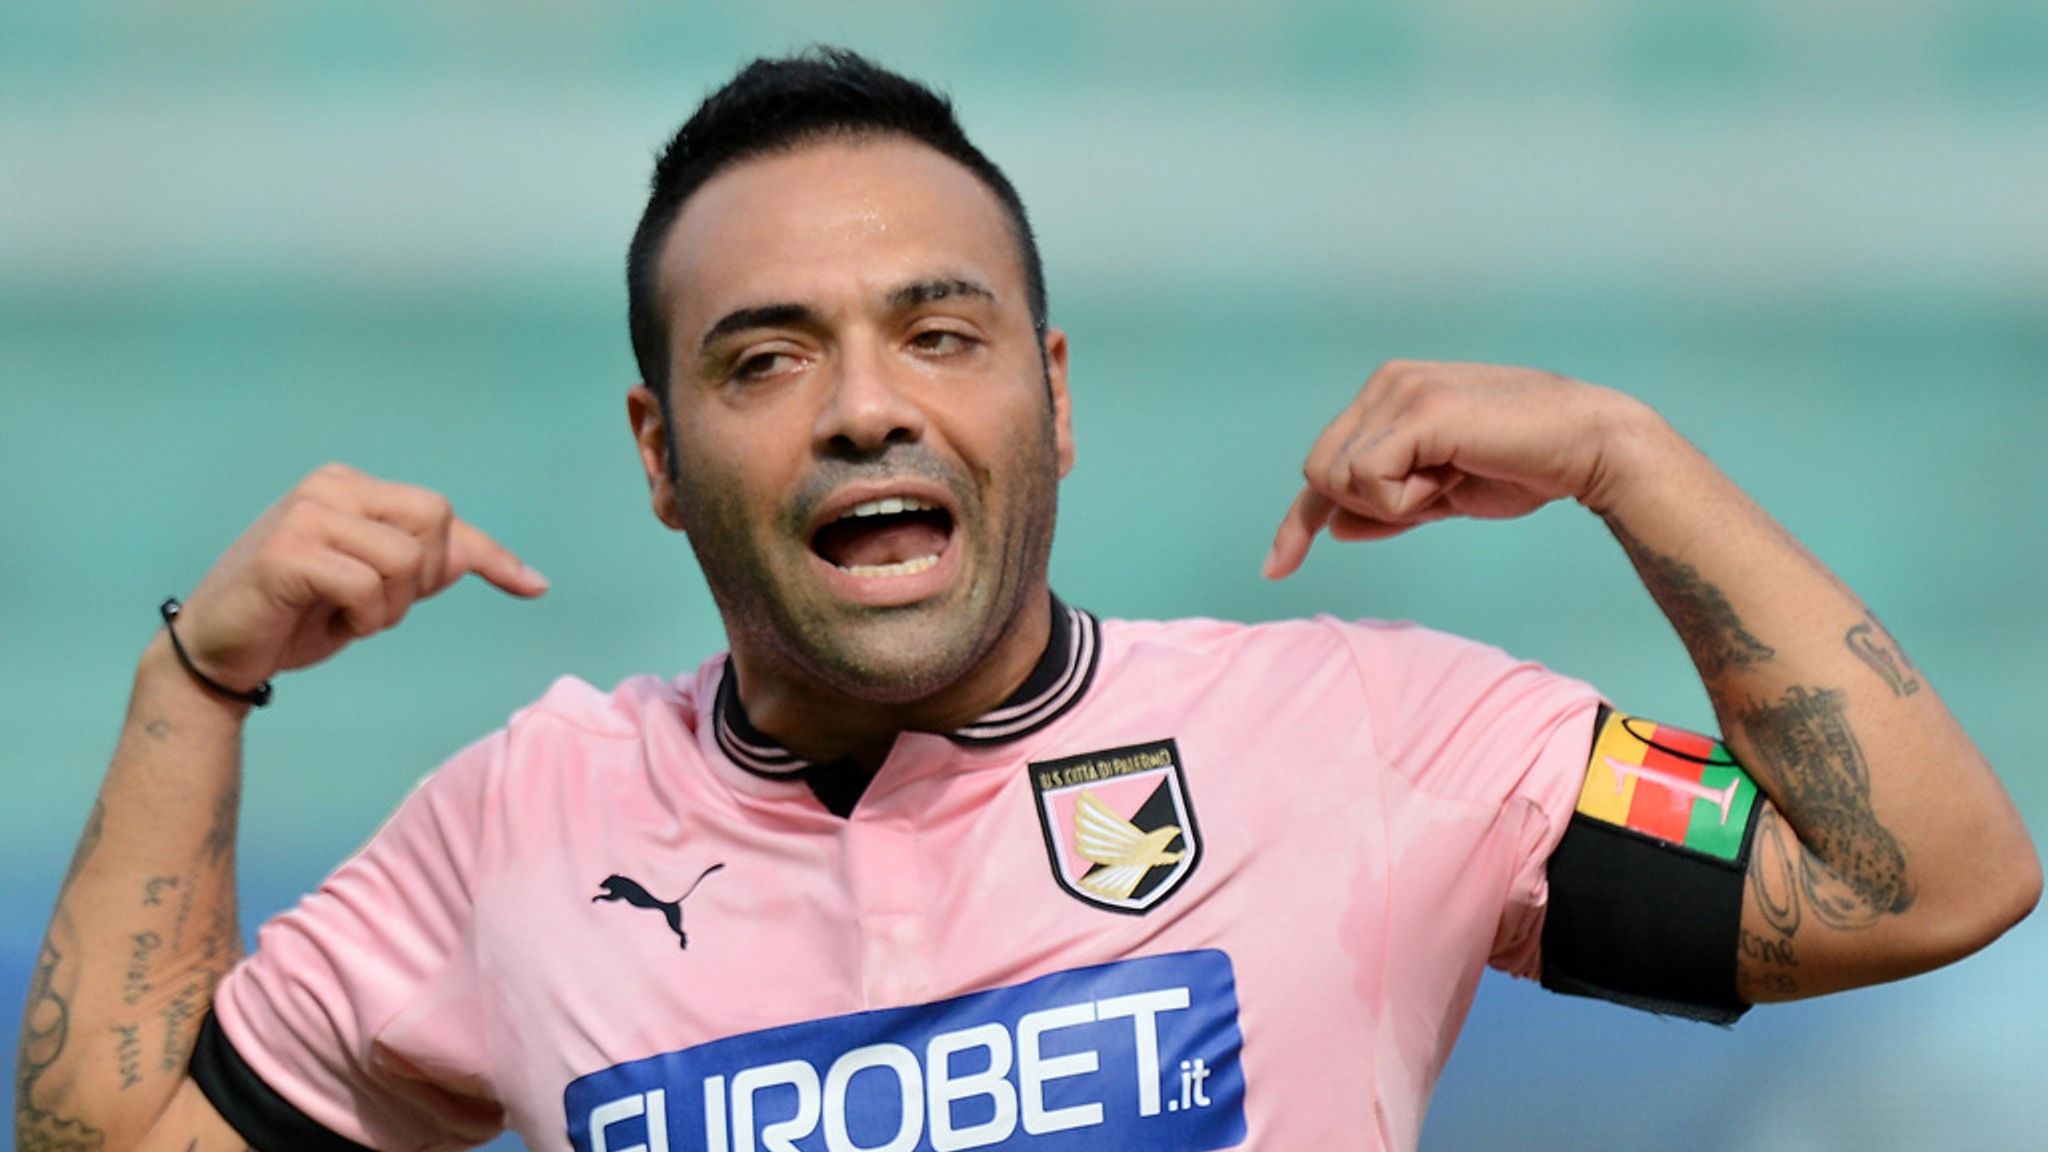 Palermo striker Fabrizio Miccoli interested in signing a contract extension, Football News